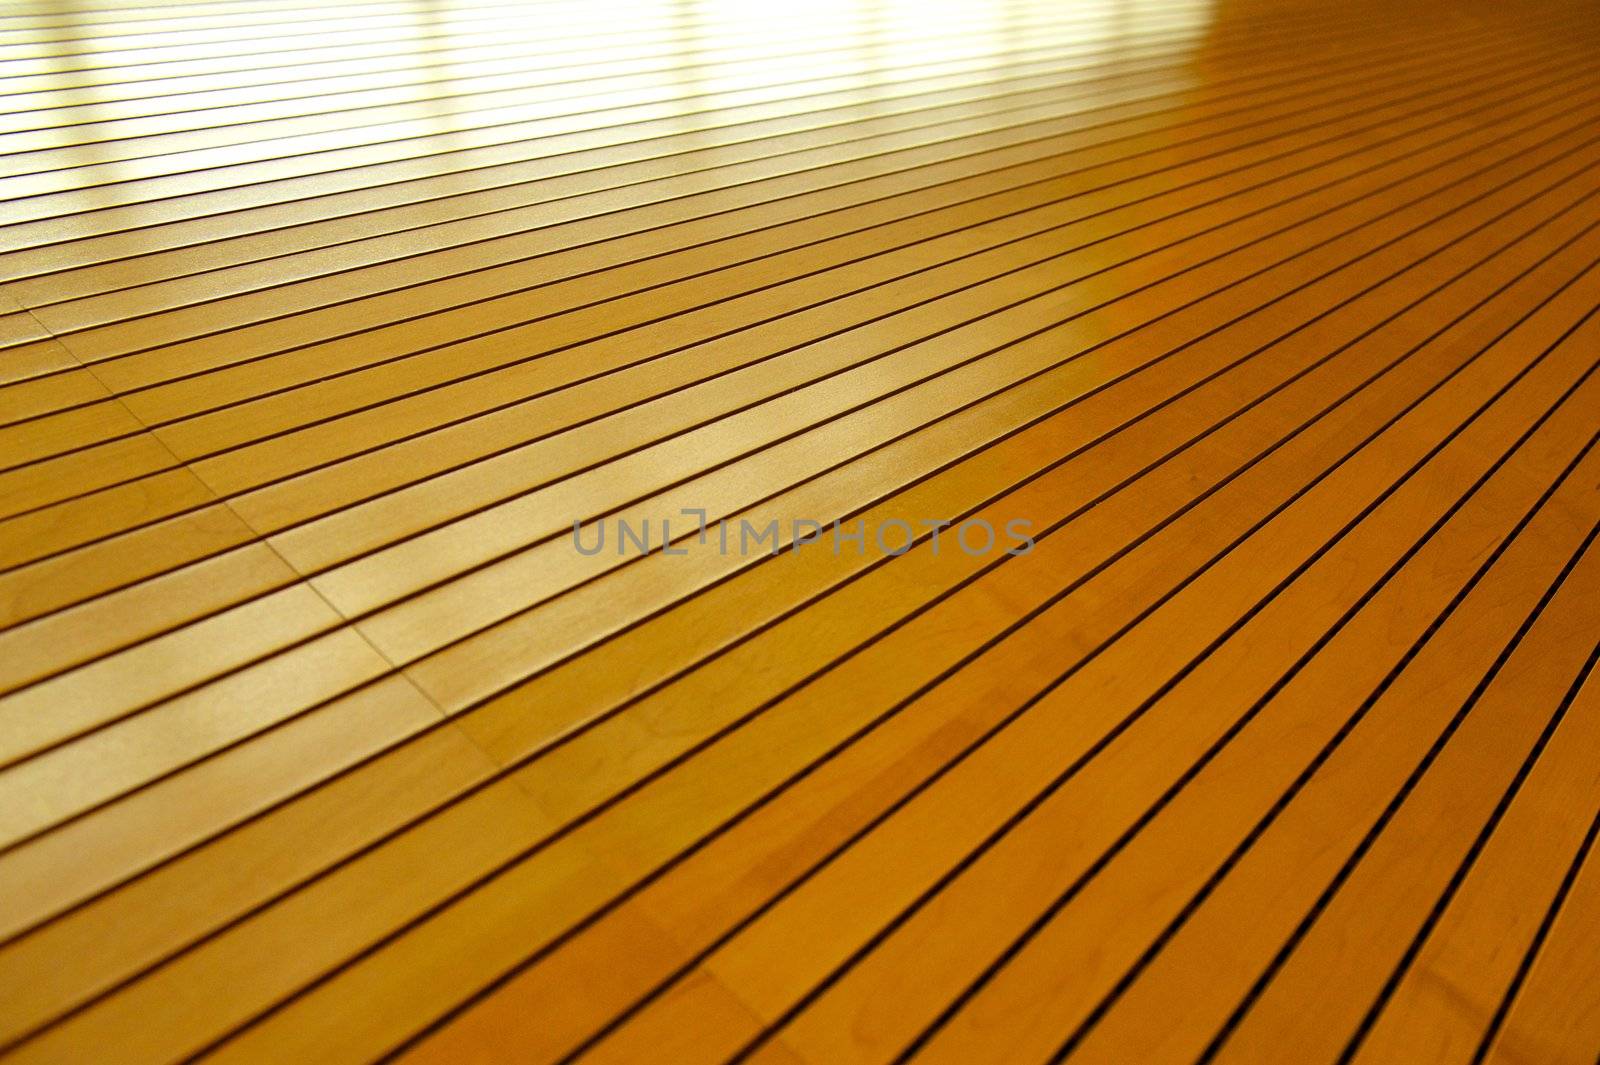 Rows of Golden Tightly Fitted Wooden Slats Background by pixelsnap